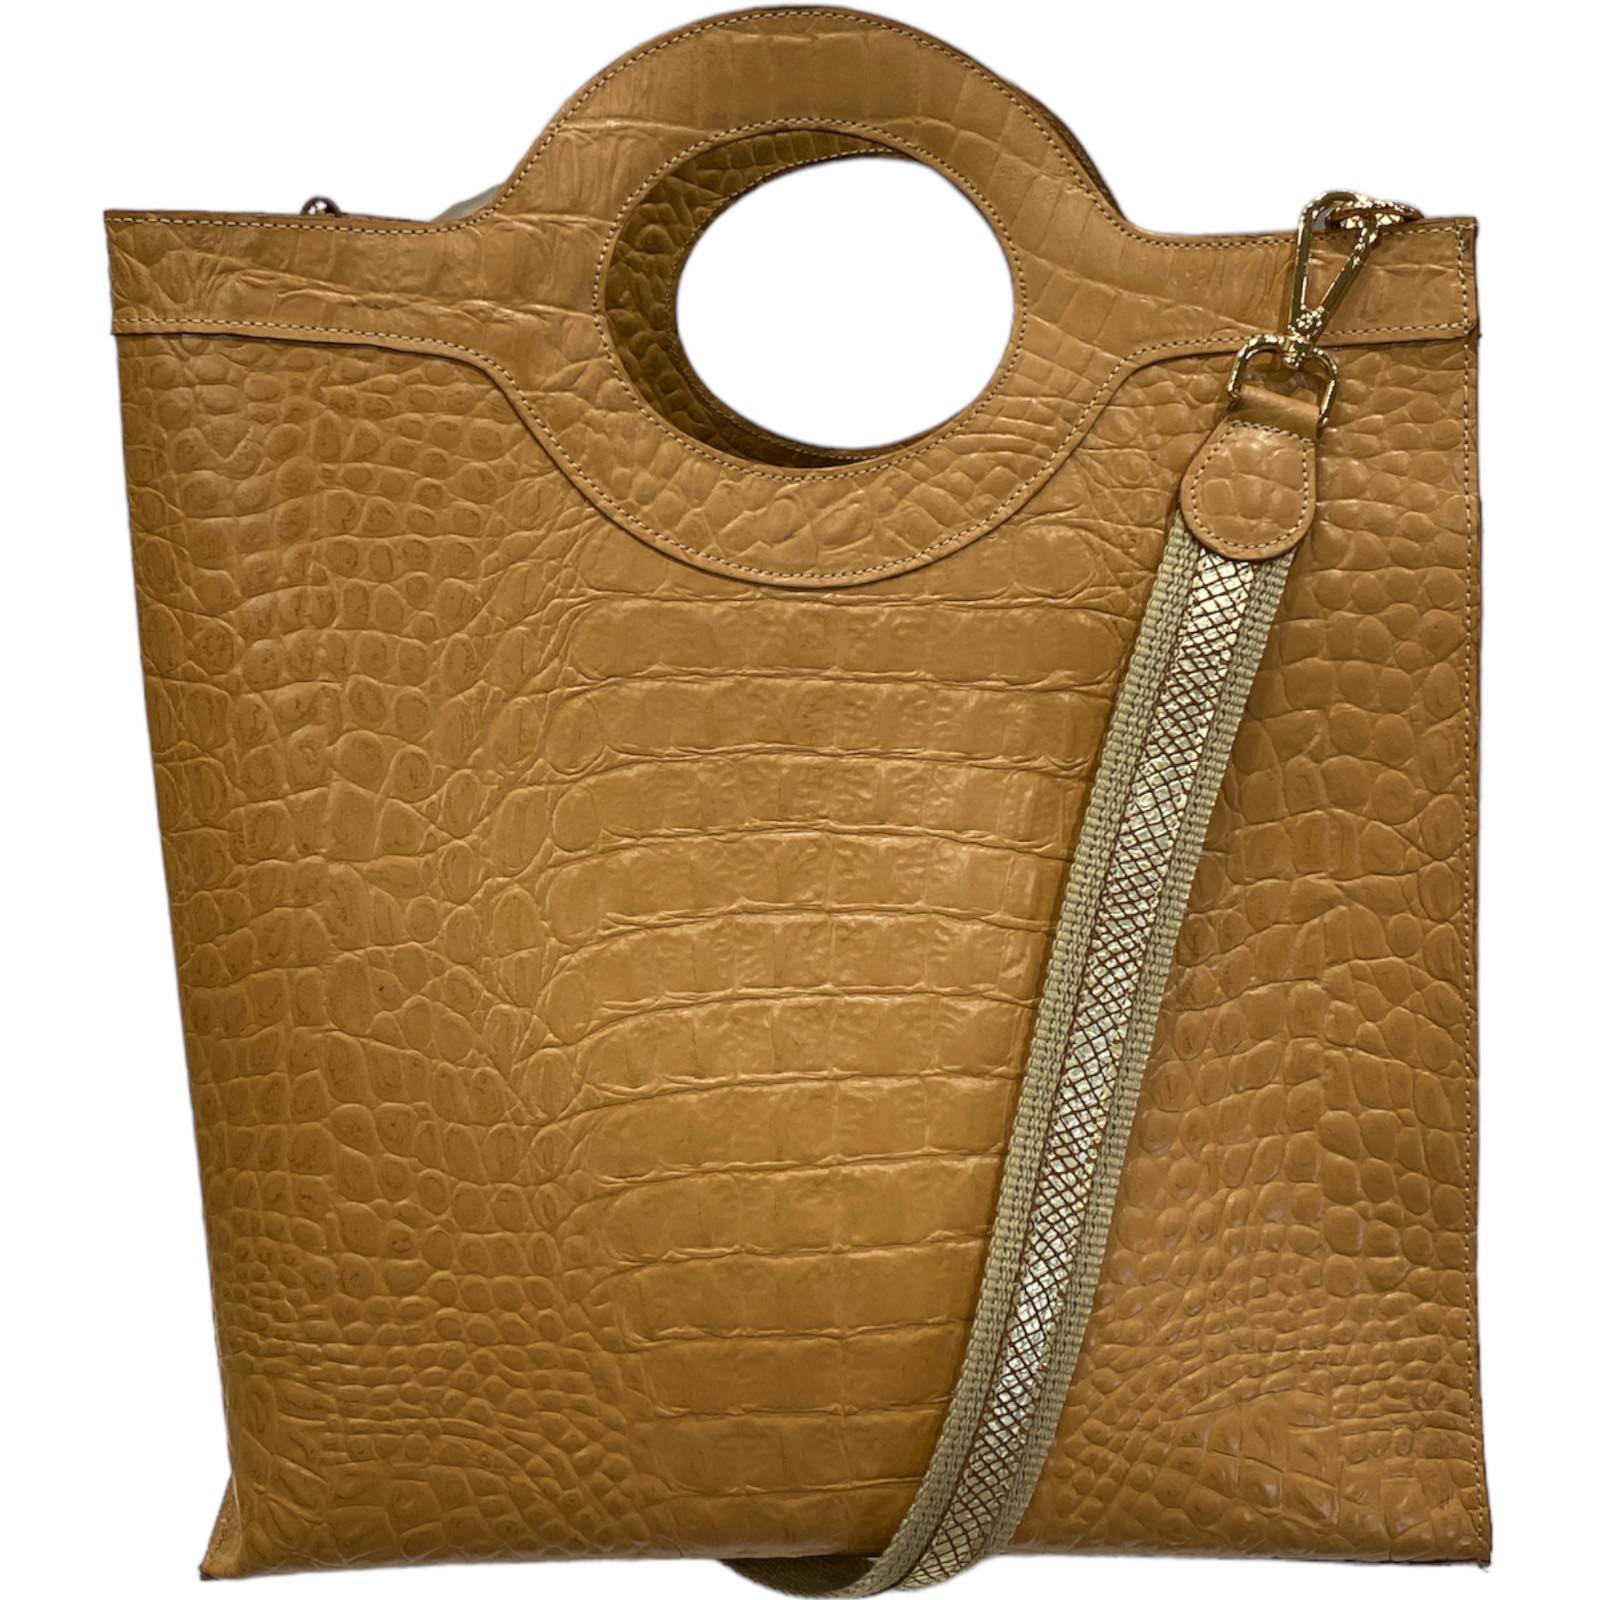 Circle. Camel and gold leather L bag